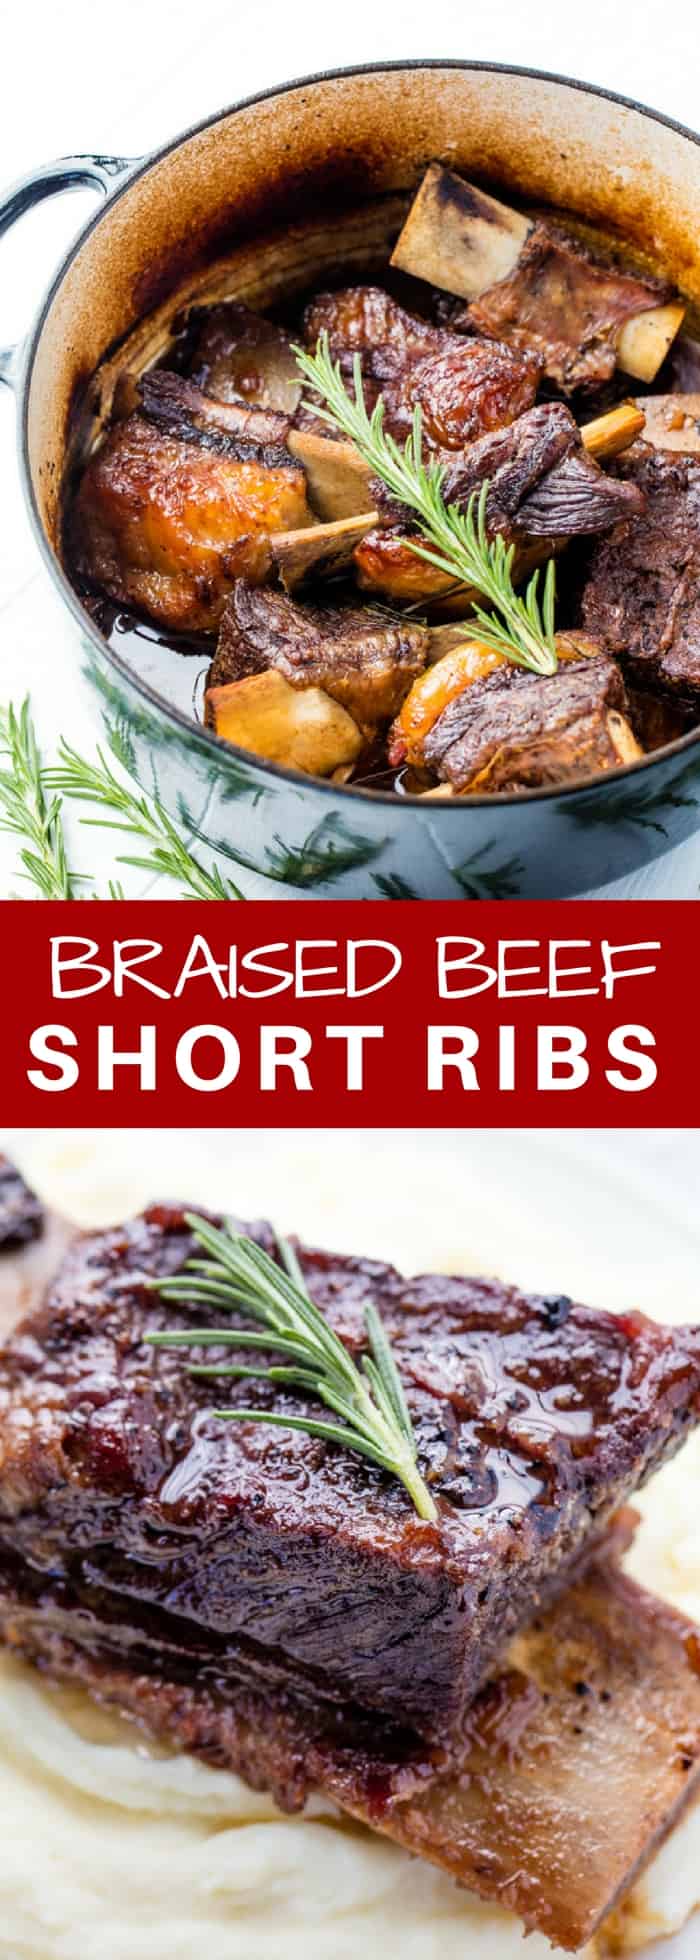 Classic Braised Beef Short Ribs are cooked low and slow until they reach fall-off-the-bone deliciousness.  This simple dish is a classic that is full of comfort food flavor. 